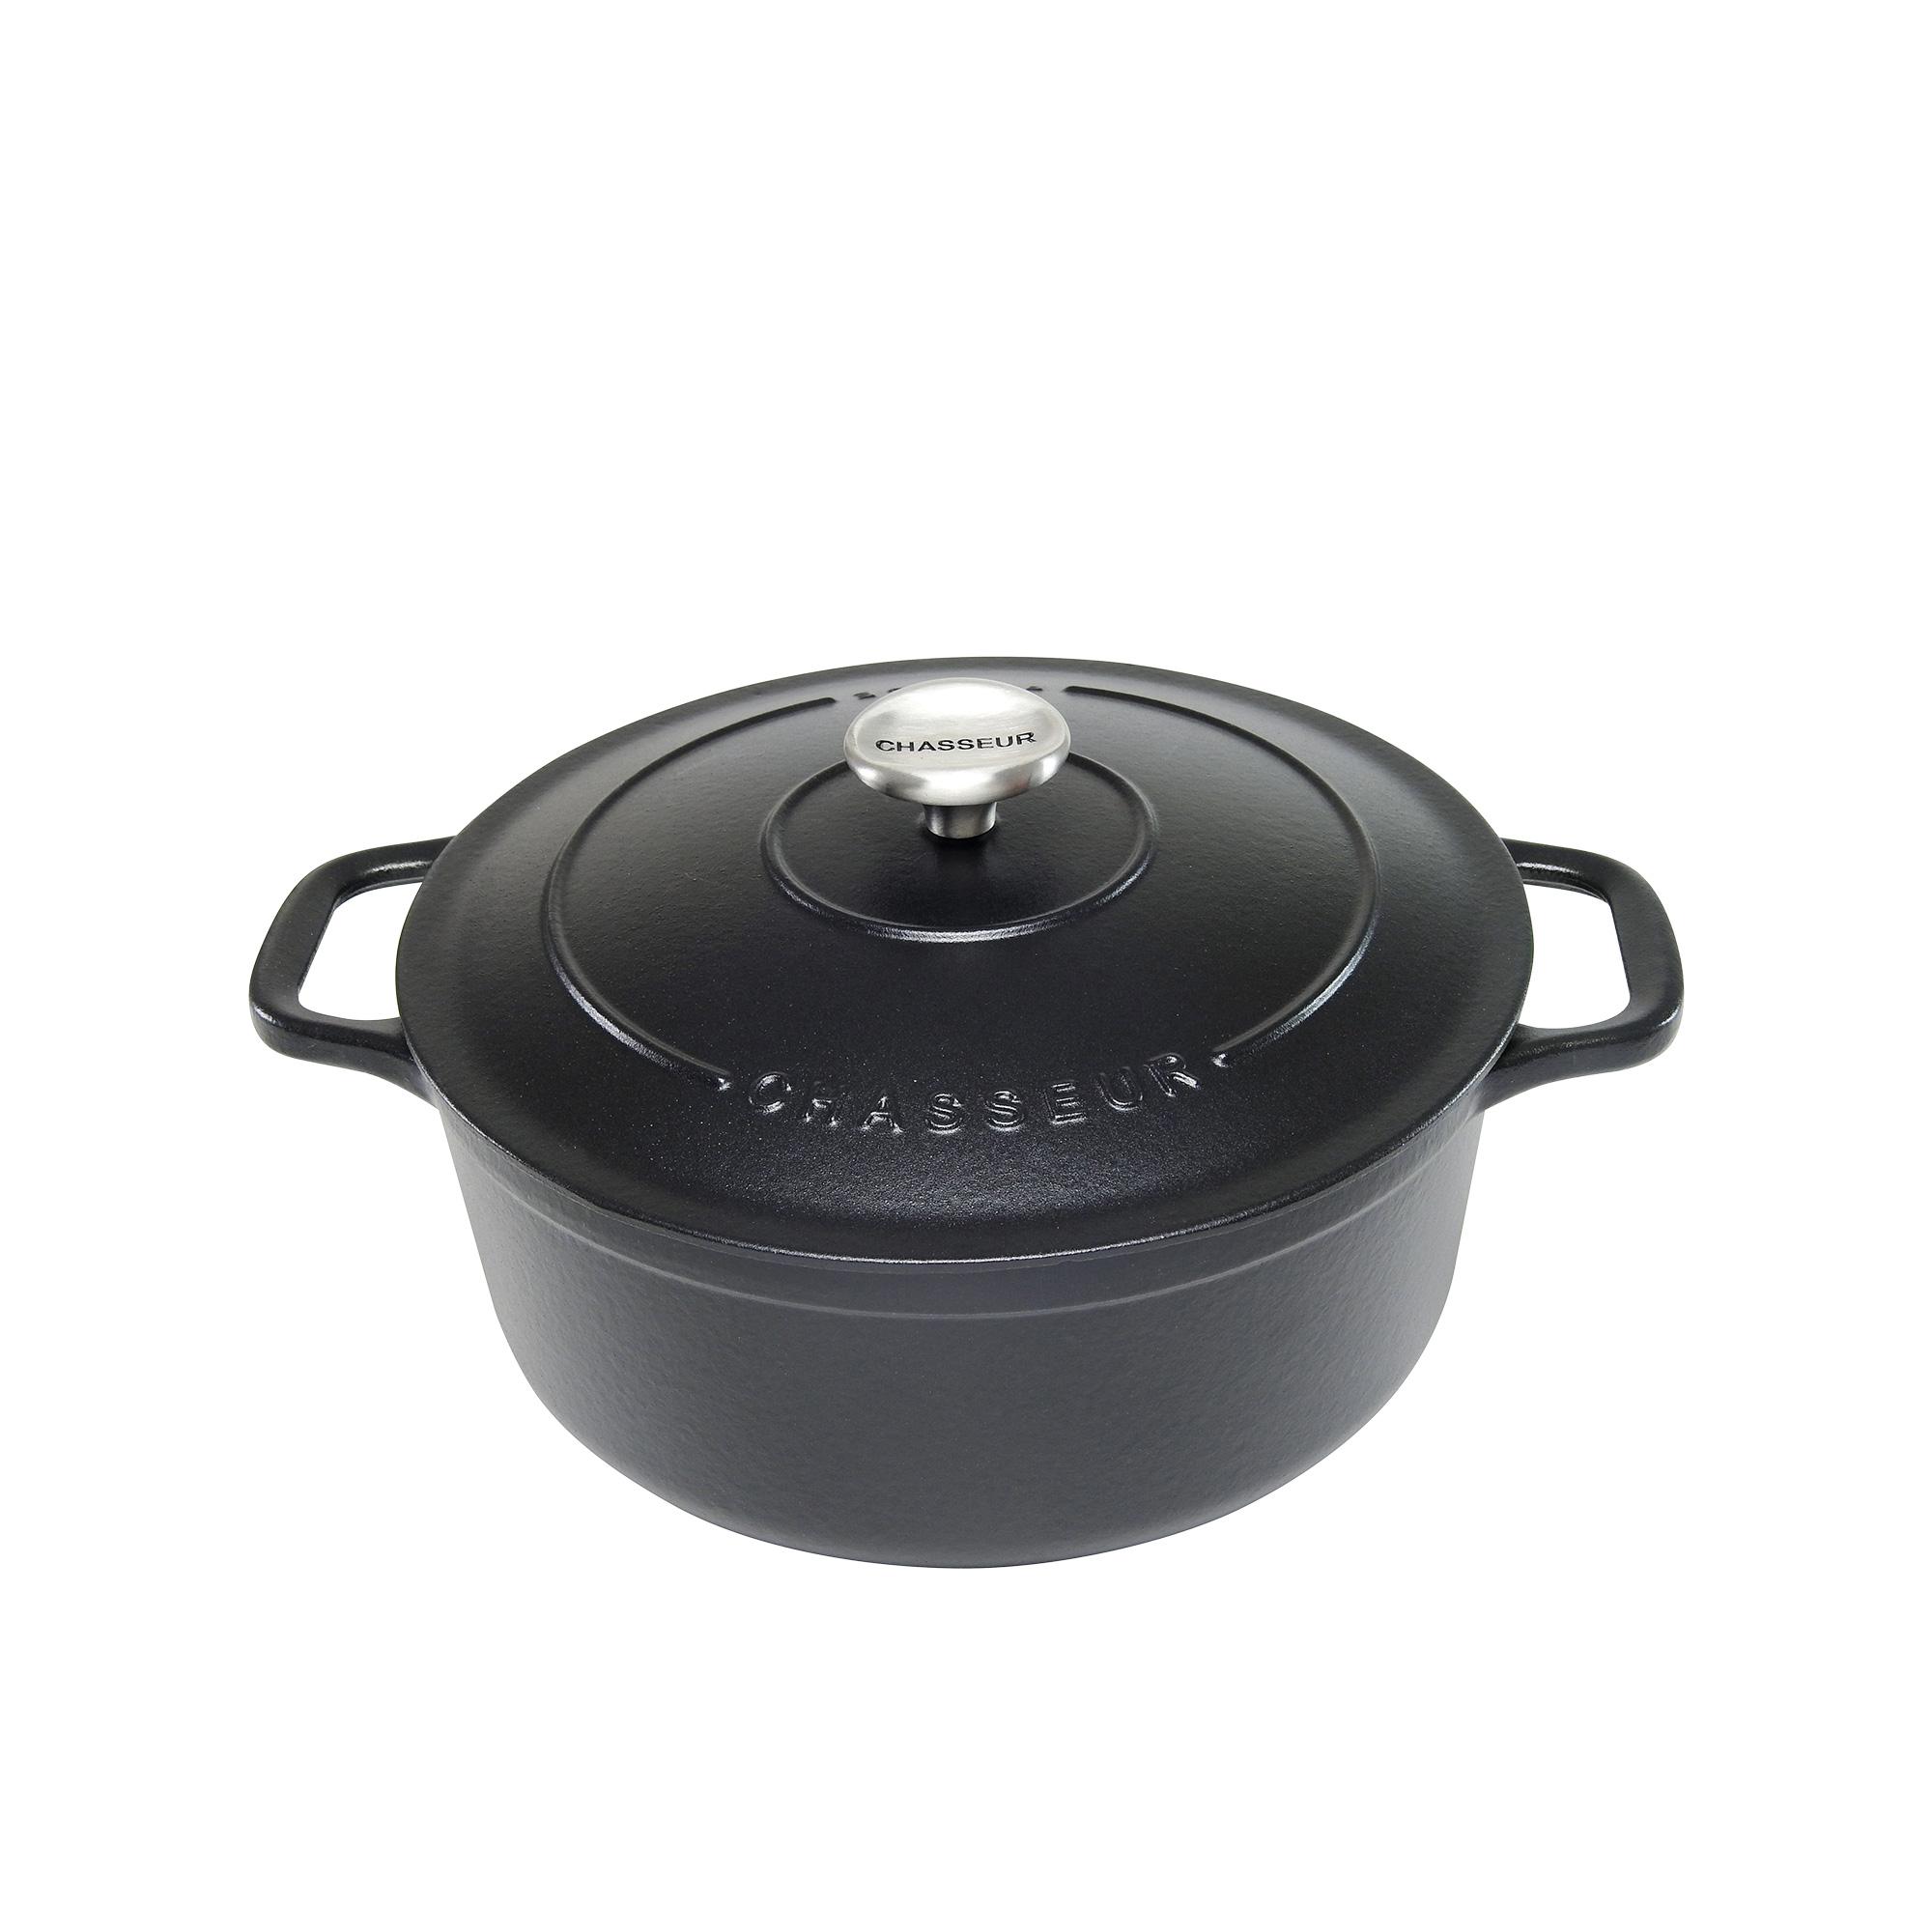 Chasseur Round French Oven 20cm - 2.5L Matte Black Image 1